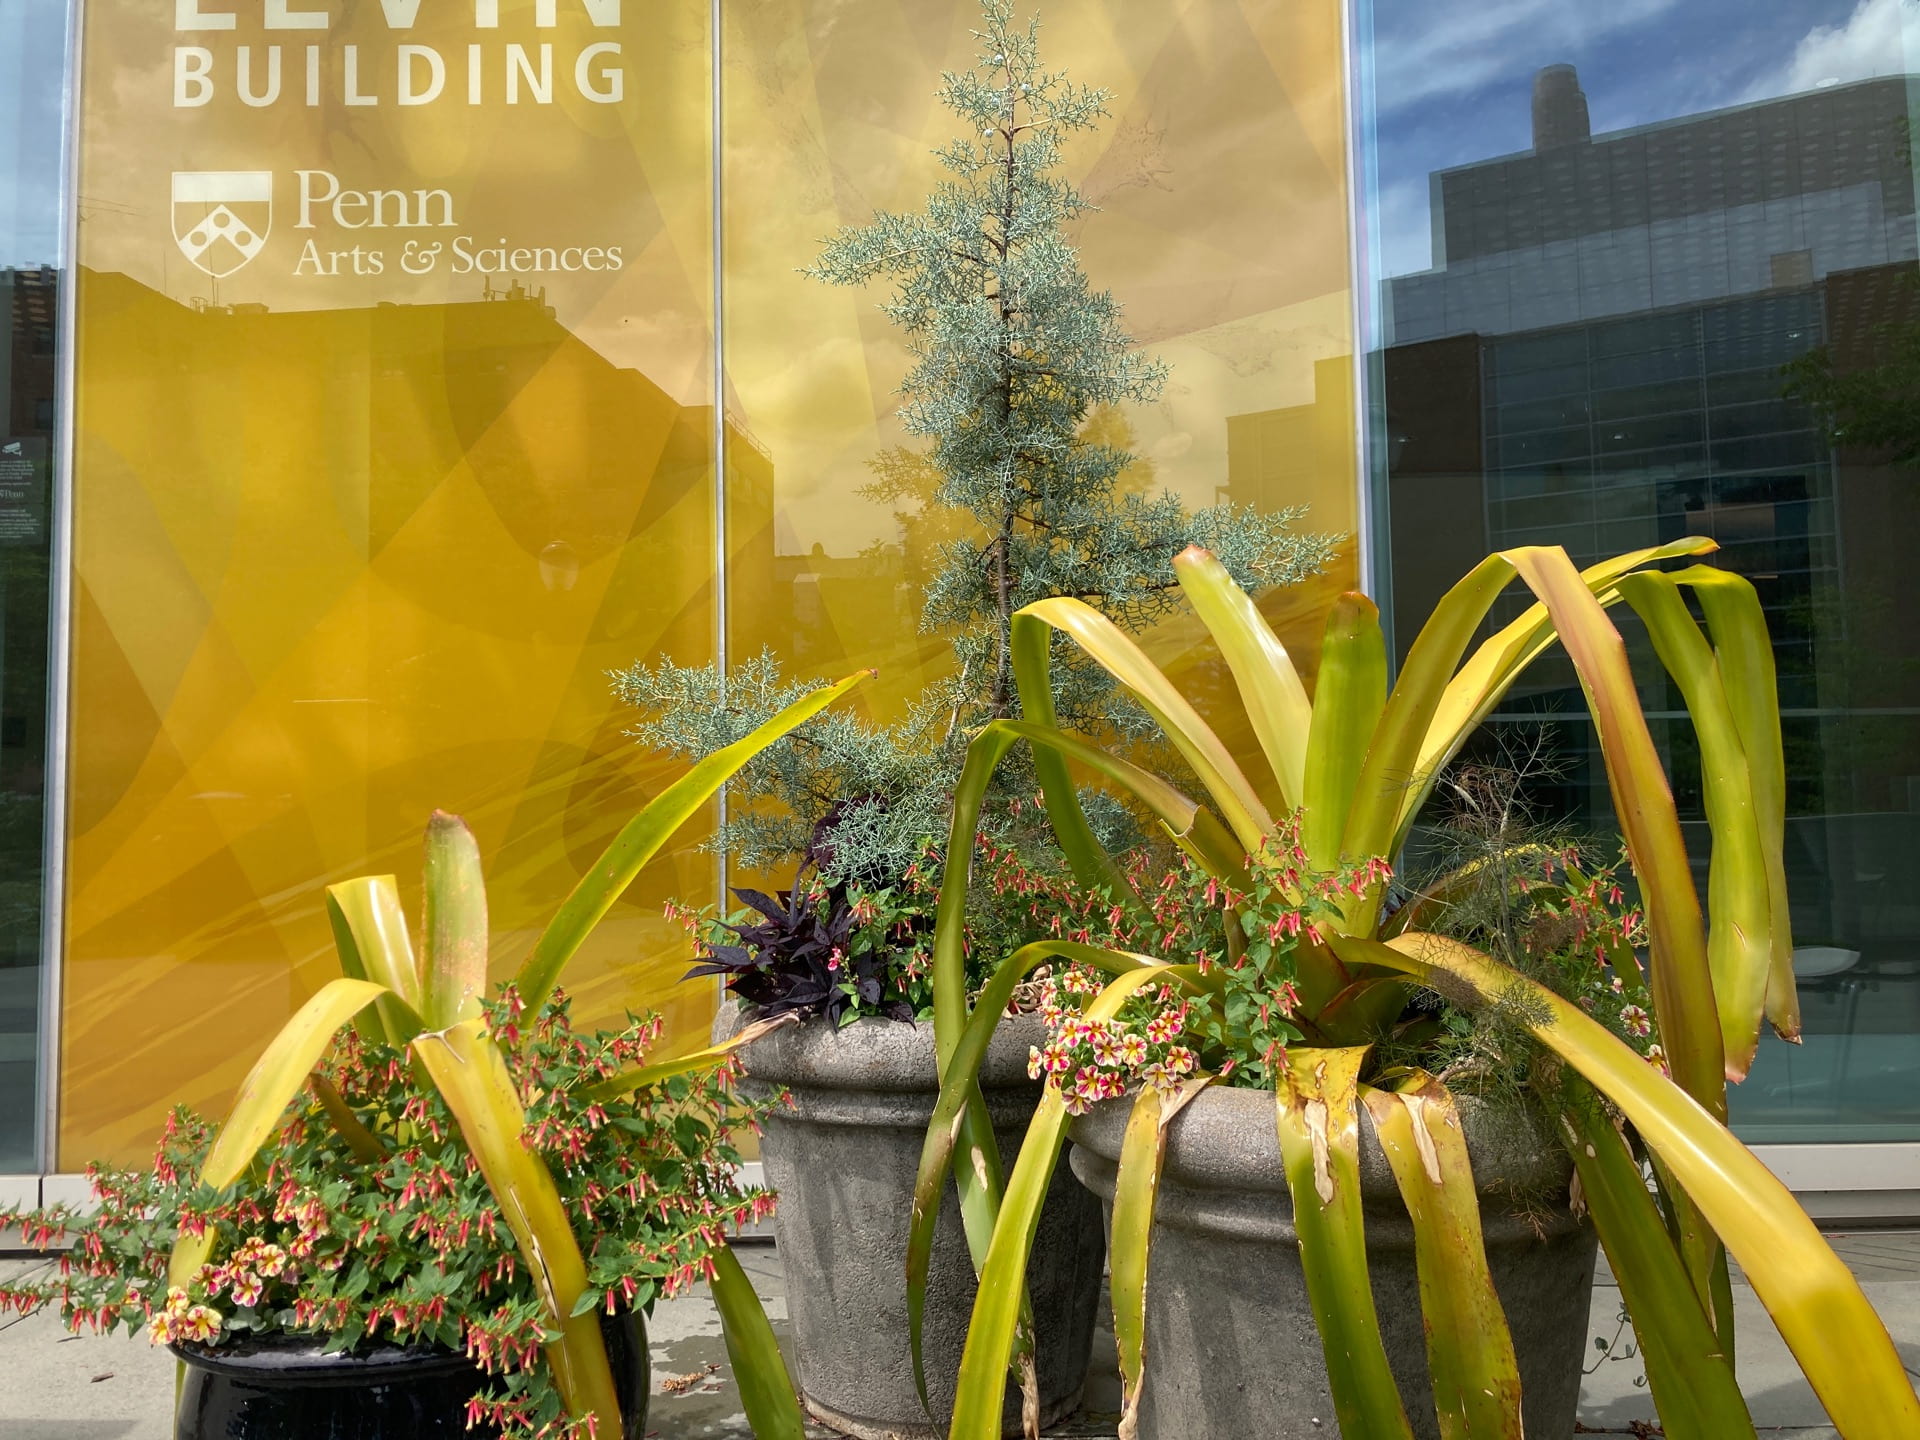 Summer containers are out on the plaza, featuring bromeliads that turn orange in the sun and an Arizona cypress.